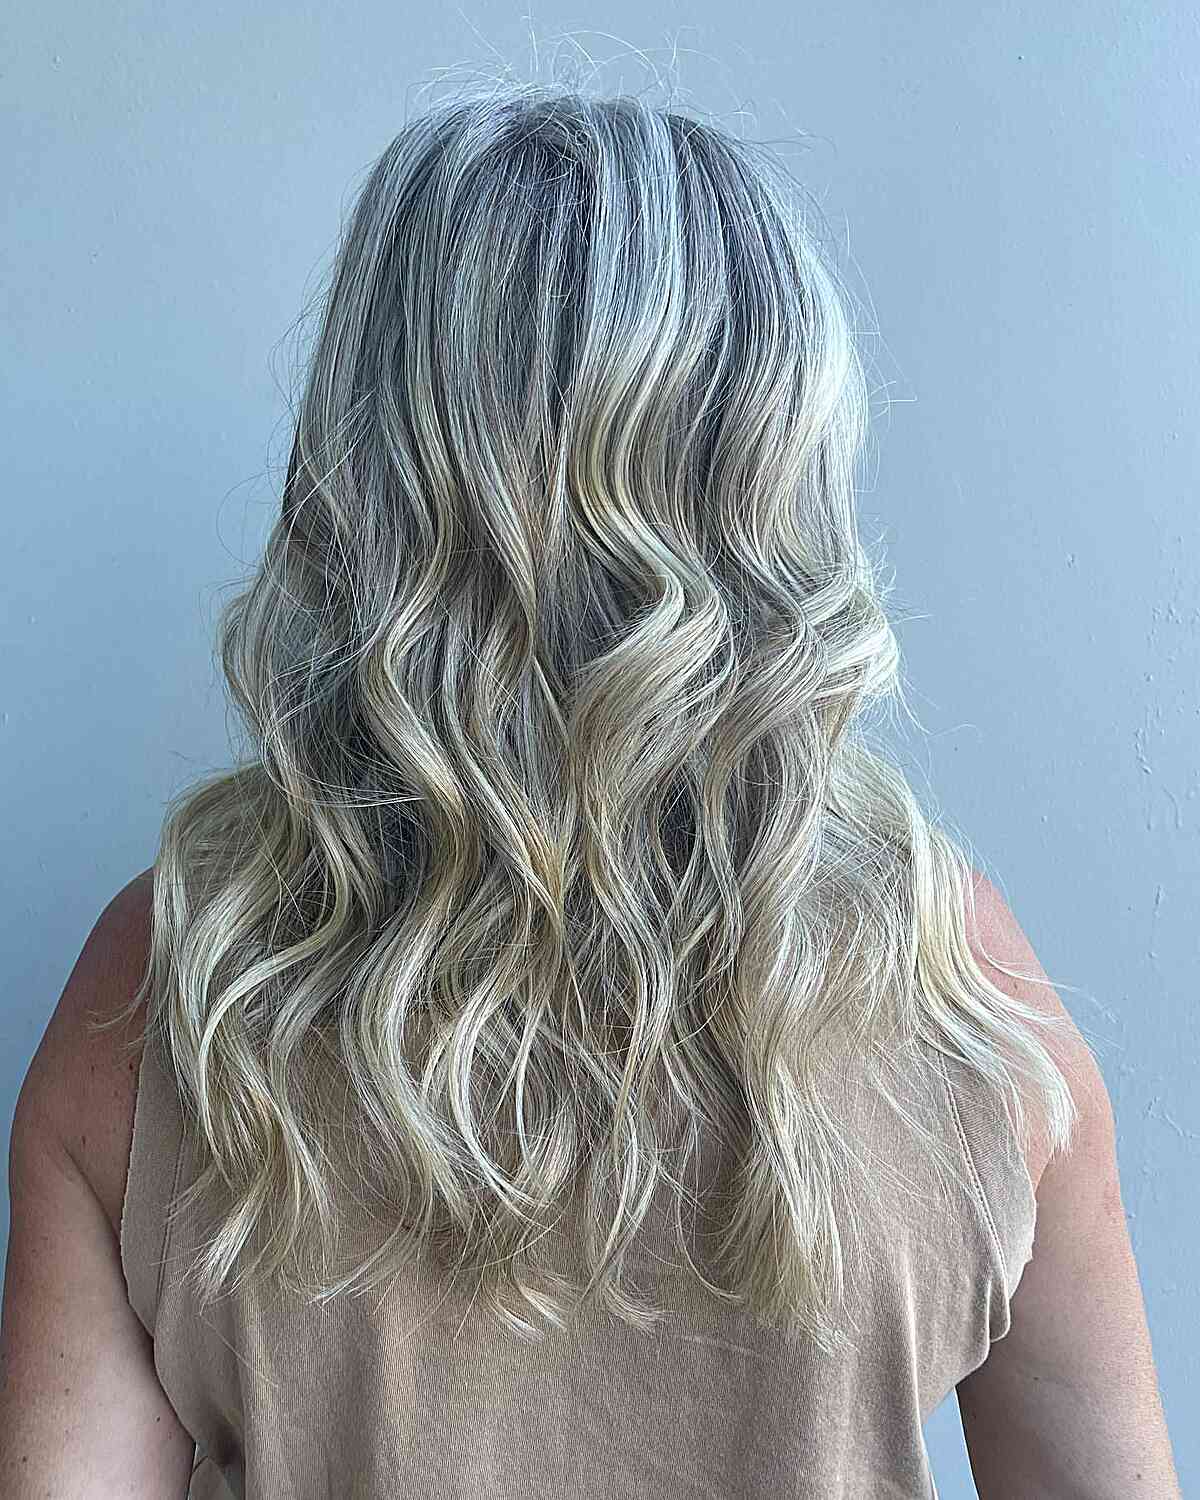 Older Women's Mid Back-Length Blonde Grey Hair with Soft Waves